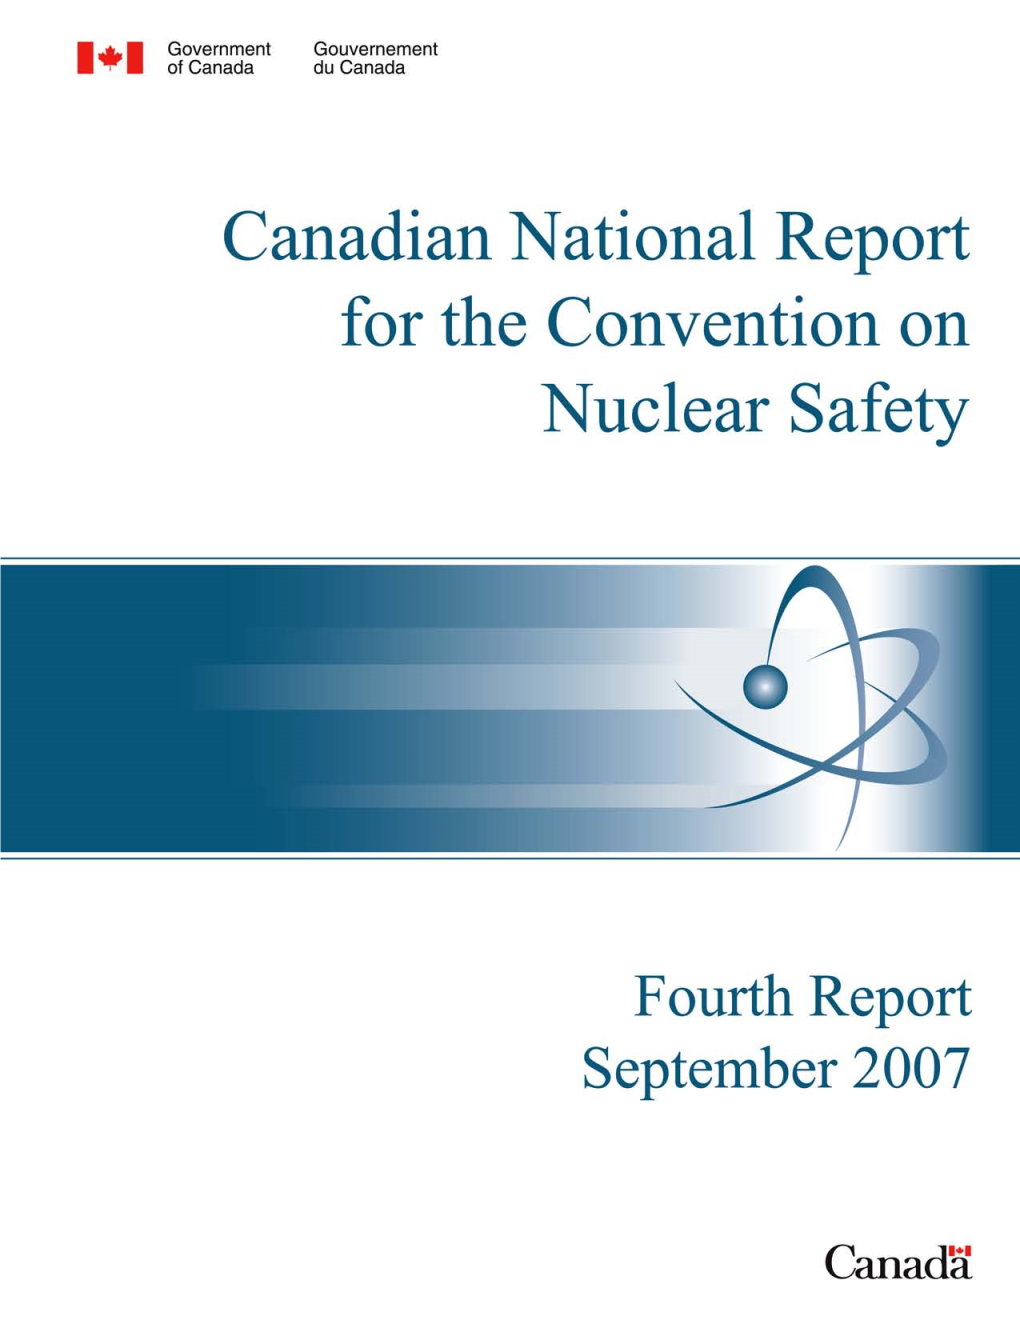 Canadian National Report for the Convention on Nuclear Safety